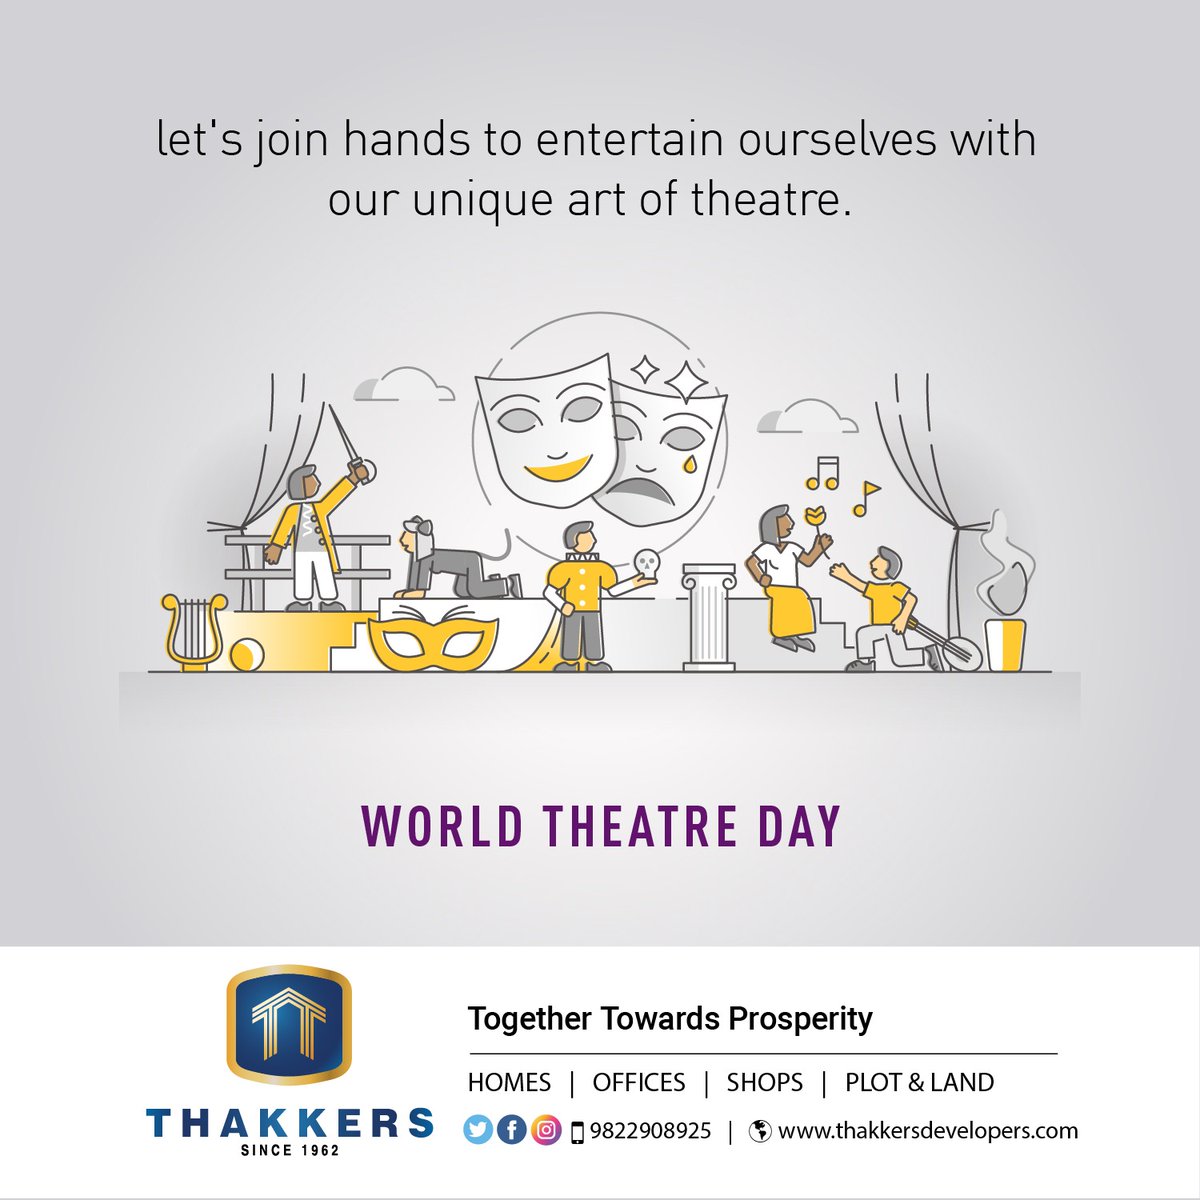 #WorldTheatreDay #theaterday #actors #theaterlife #Teatro #theatrearts #art #theatreartist #shows #Acts #Entertainment #theaterperformance #acting #uniqueart #actresses 
#Thakkers #Nashik #Homesforall #Plot #Land #Homes #Flats #Office #Showrooms #Shops